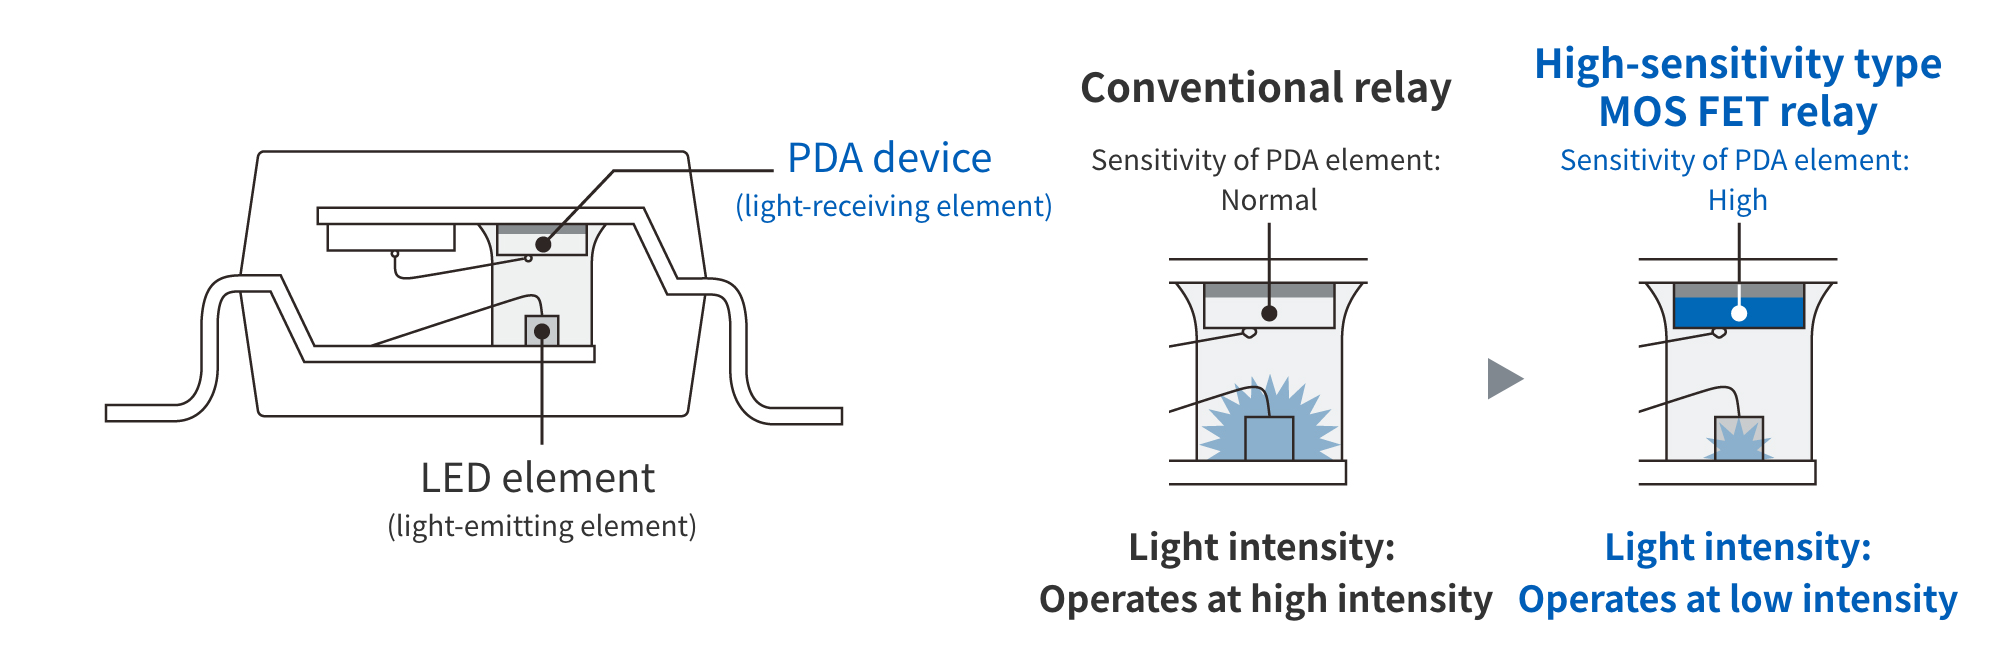 Conventional relay: Sensitivity of PDA element: Normal, Light intensity: Operates at high intensity　High-sensitivity type MOS FET relay: Sensitivity of PDA element: High, Light intensity: Operates at low intensity